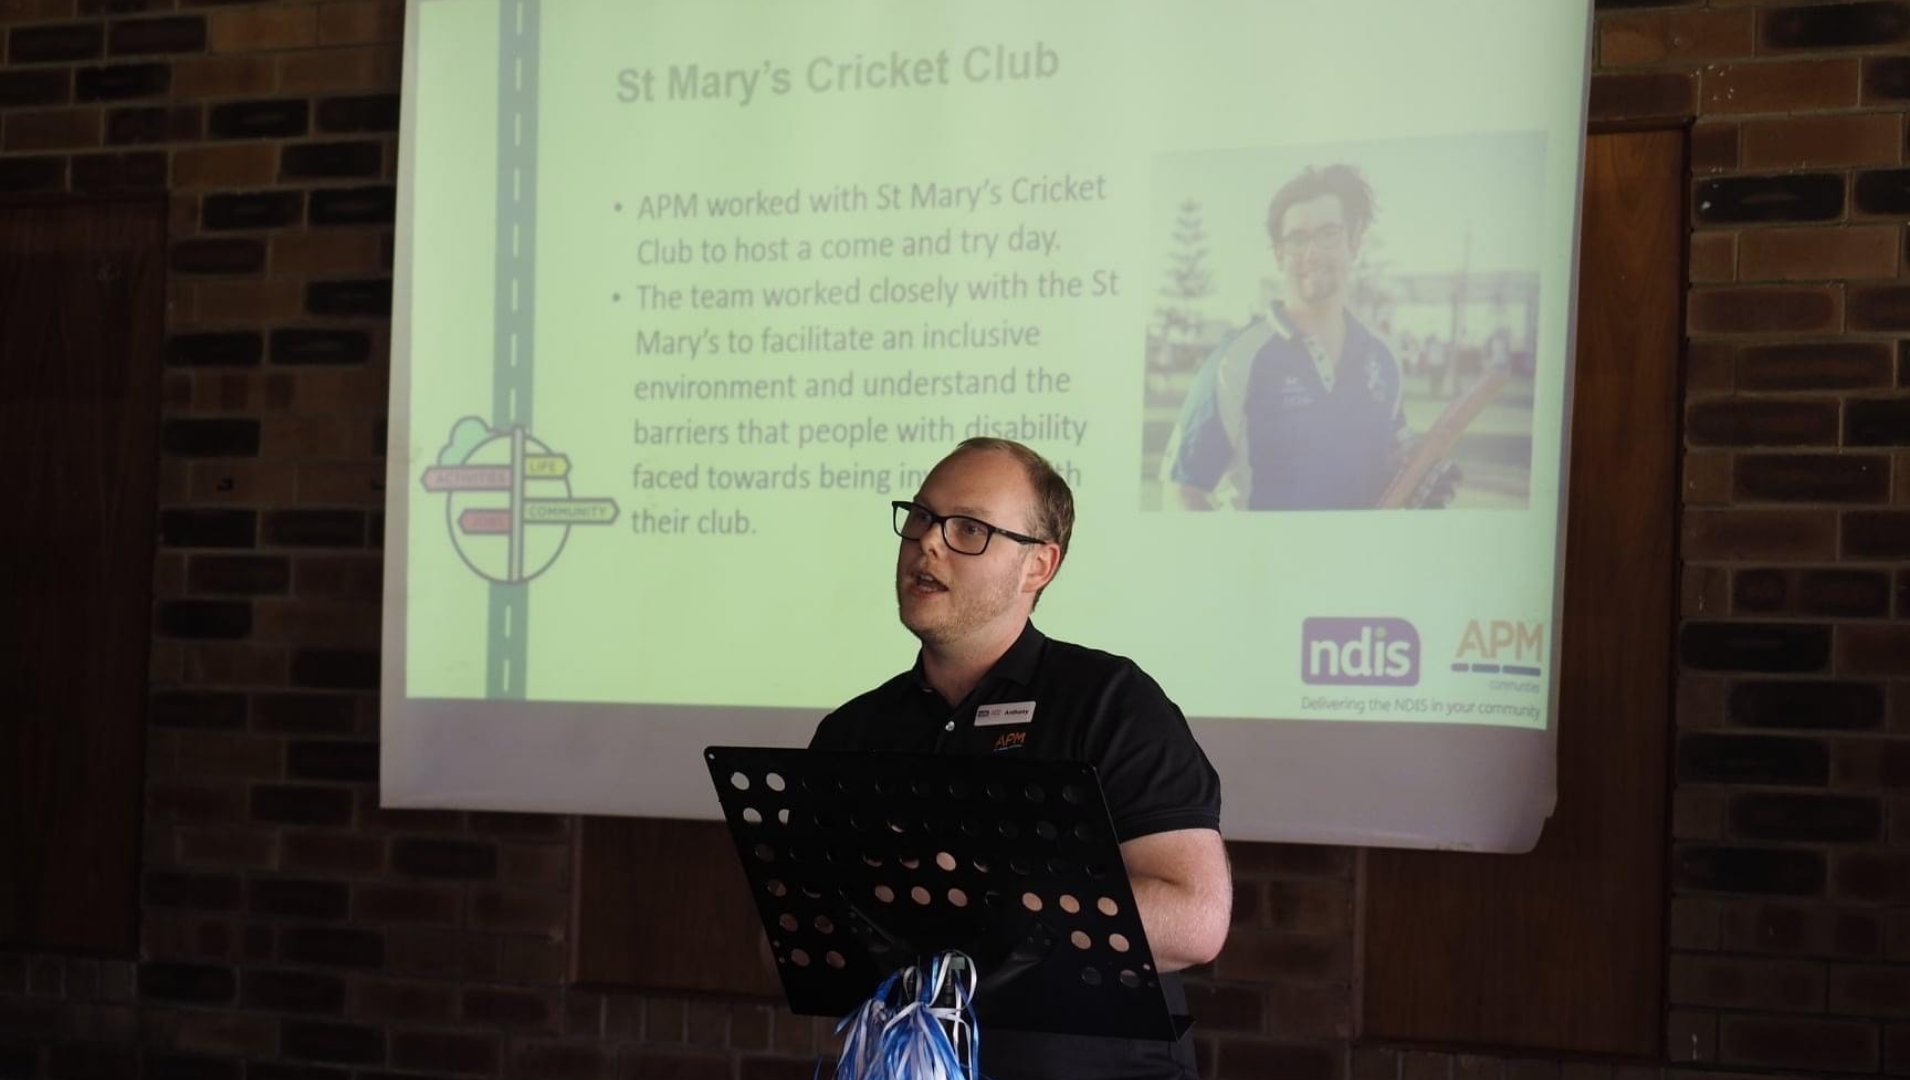 APM Communities staff member Anthony Pyle is pictured speaking at an event with a powerpoint slide in the background